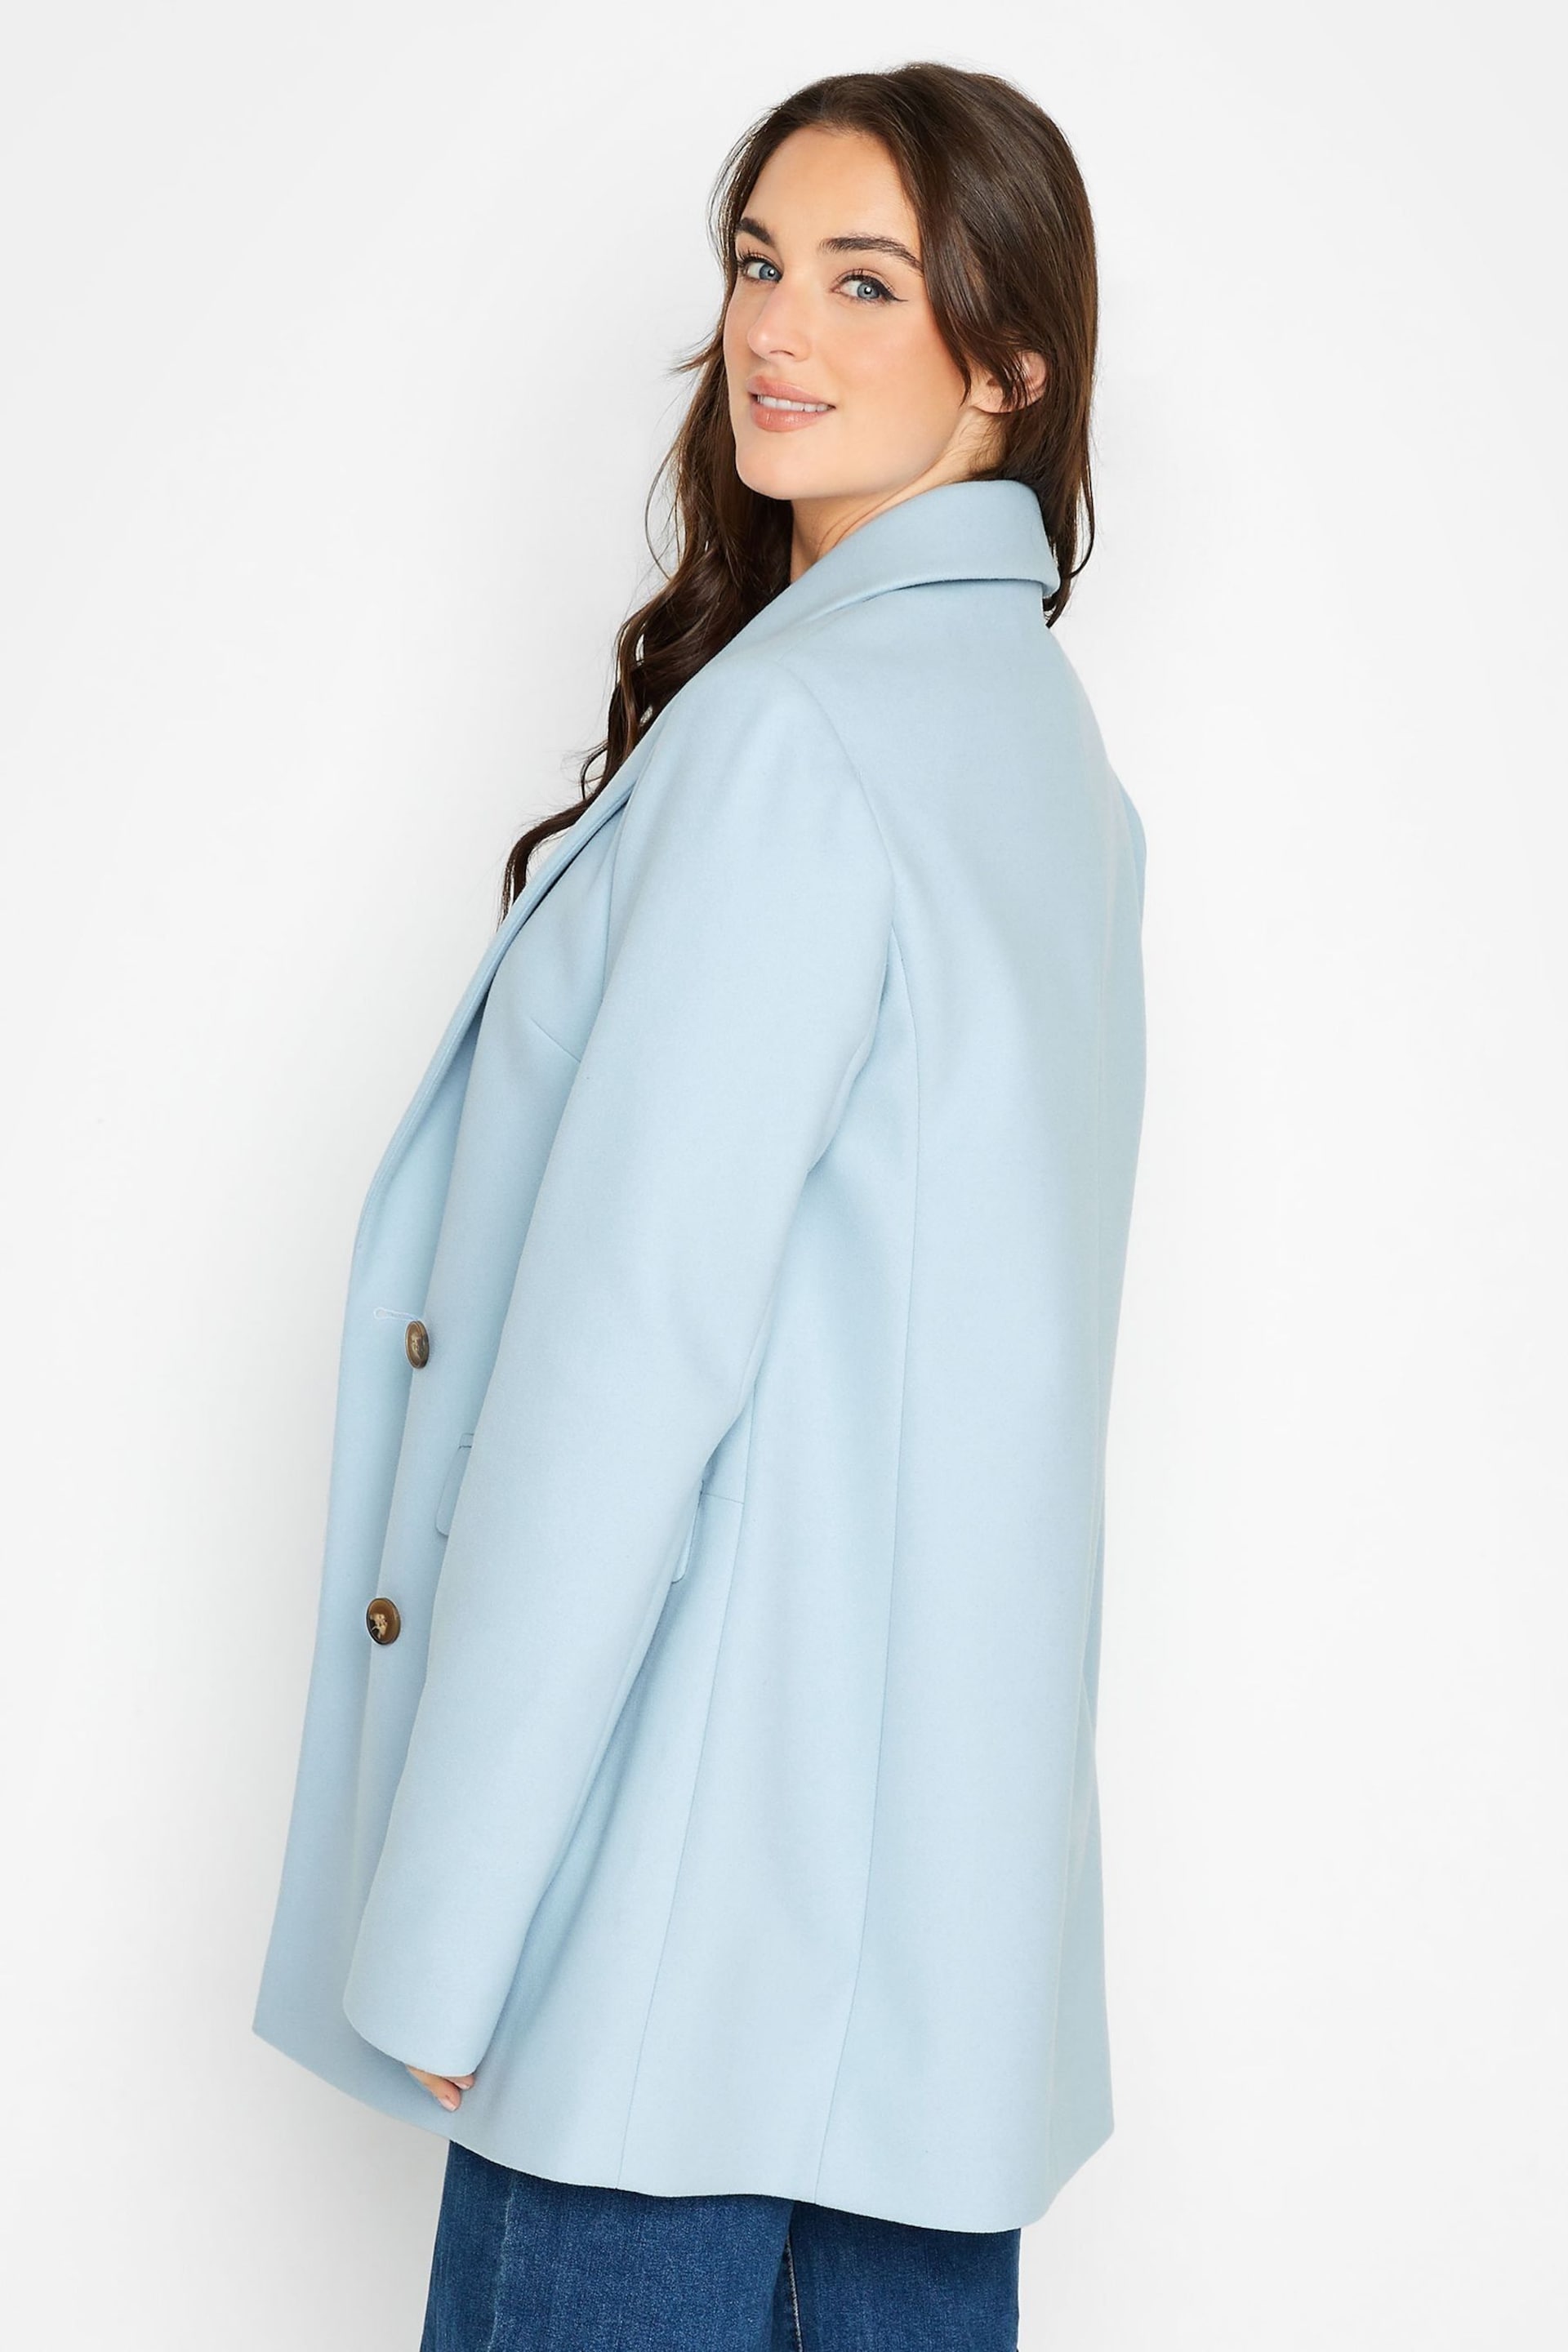 Long Tall Sally Blue Double Breasted Jacket - Image 3 of 4